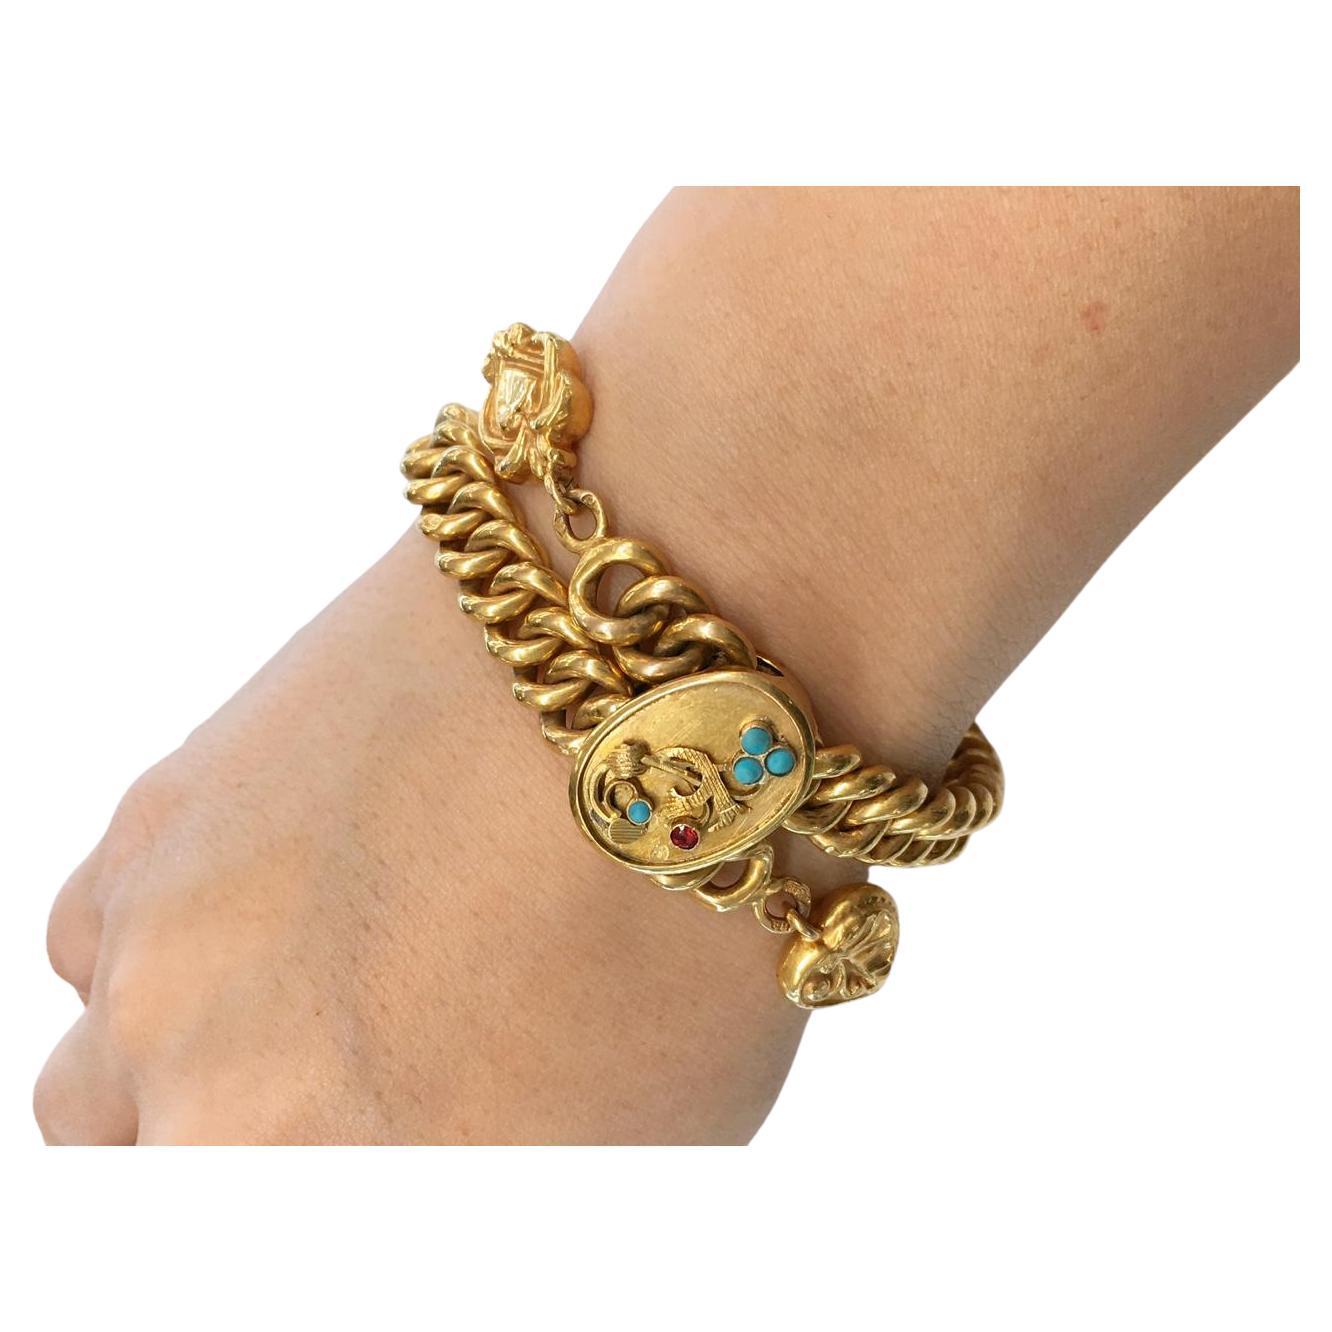 Antique Russian 14k gold bracelet with magnificent lock technique that fits all rest size decorted with blue turquoise with total 14k gold weight of 17.3 grams hall marked 56 imperial Russian gold standard and Moscow assay mark and import mark and